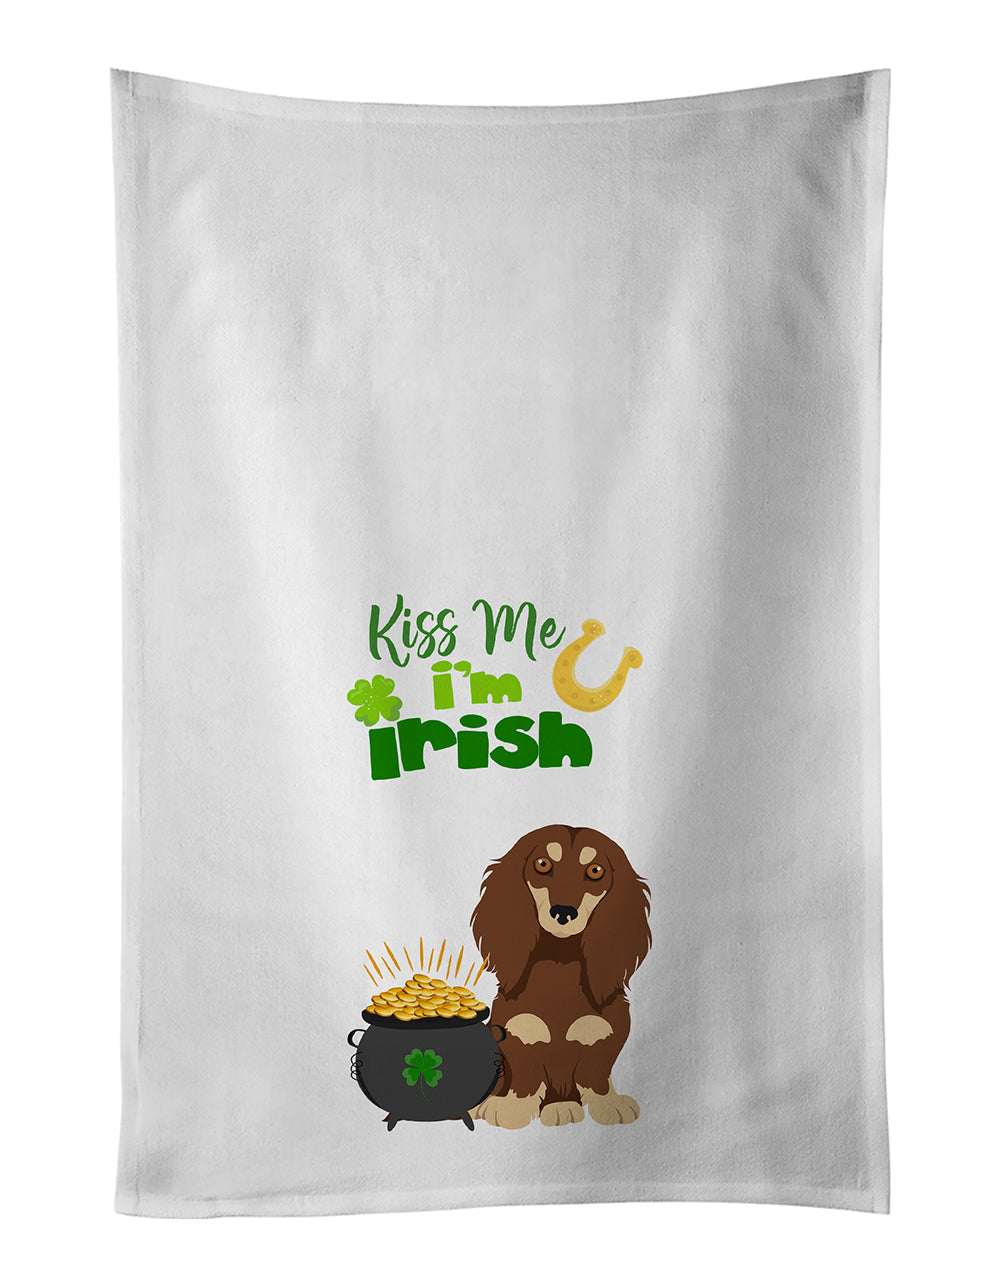 Buy this Longhair Chocolate and Cream Dachshund St. Patrick's Day White Kitchen Towel Set of 2 Dish Towels